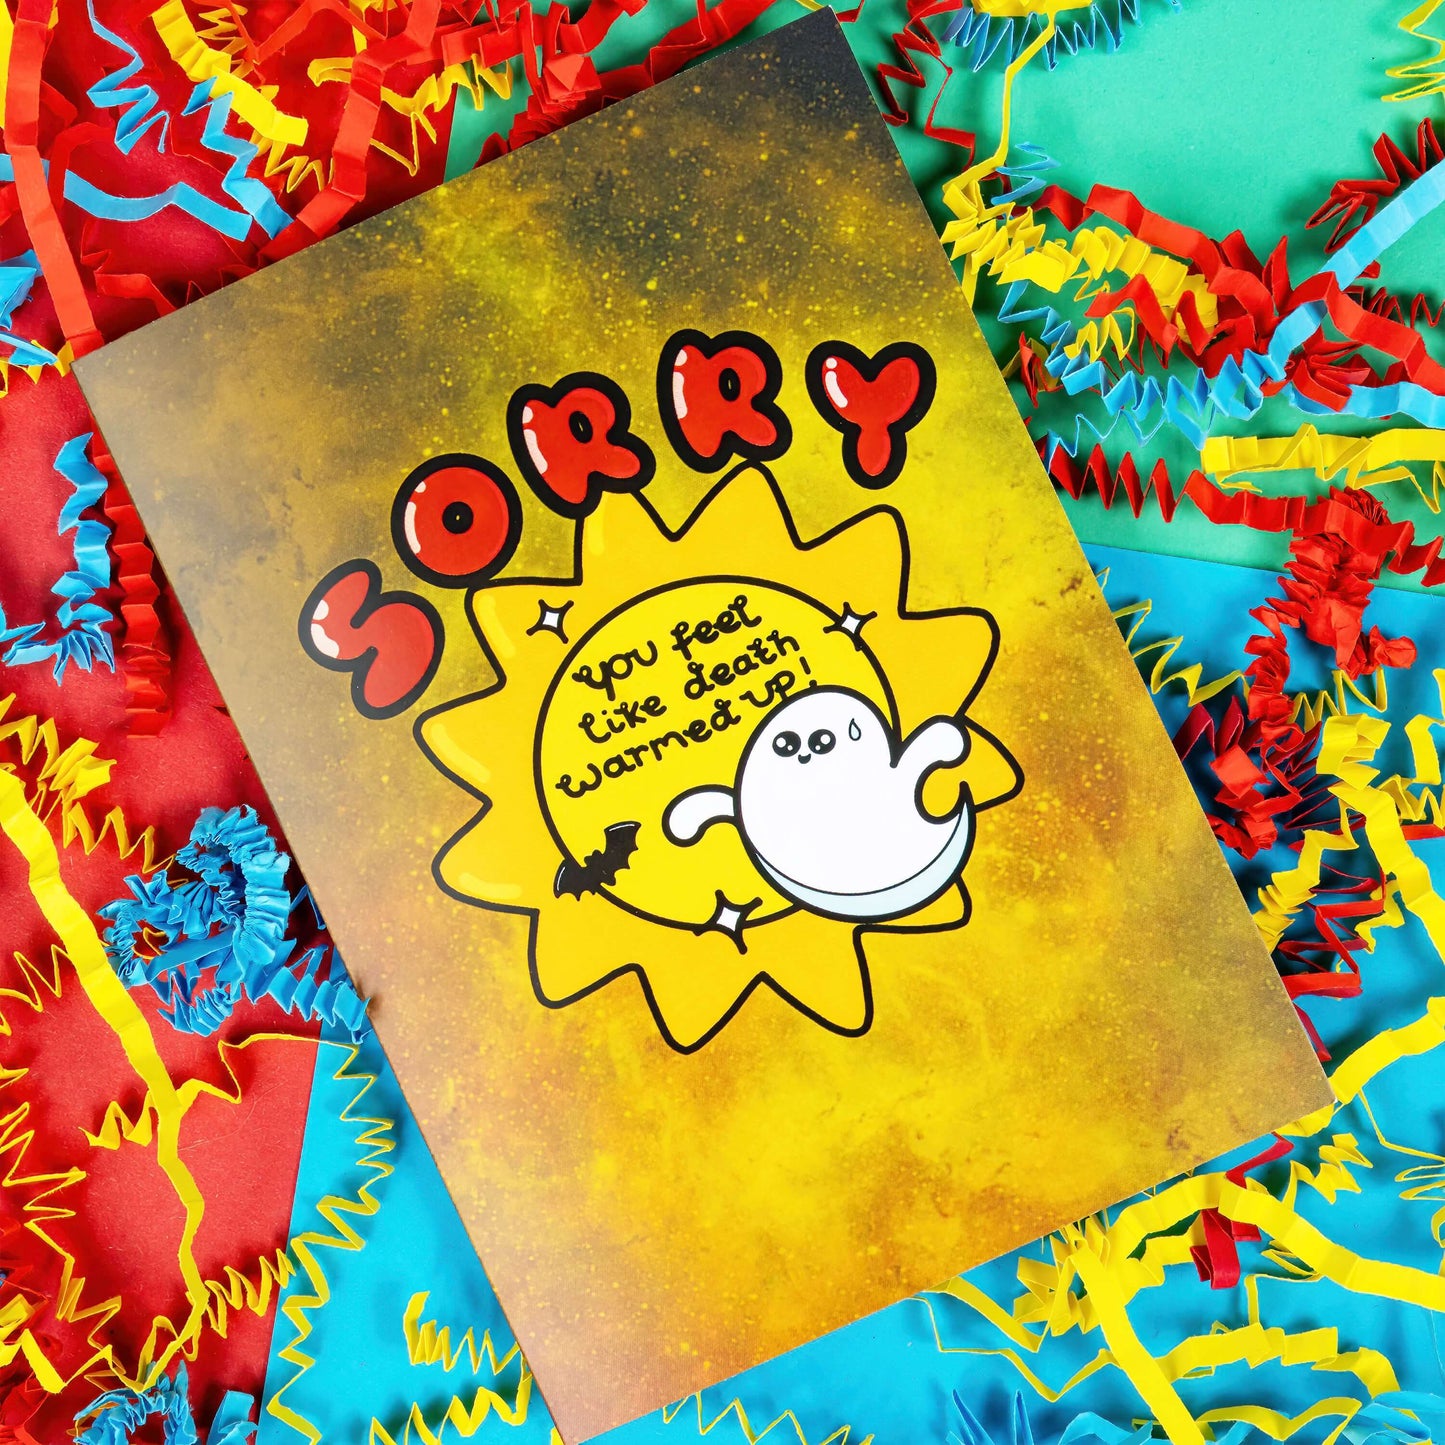 A yellow greeting card with black paint splatters. 'Sorry' is written in big red letters above an illustration of a sun with 'You feel like death warmed up!' inside. there are also sparkles, a sweating ghost and a bat around the sun. The background of the photo is colourful card confetti. The spooky design is inspired by get well soon cards.